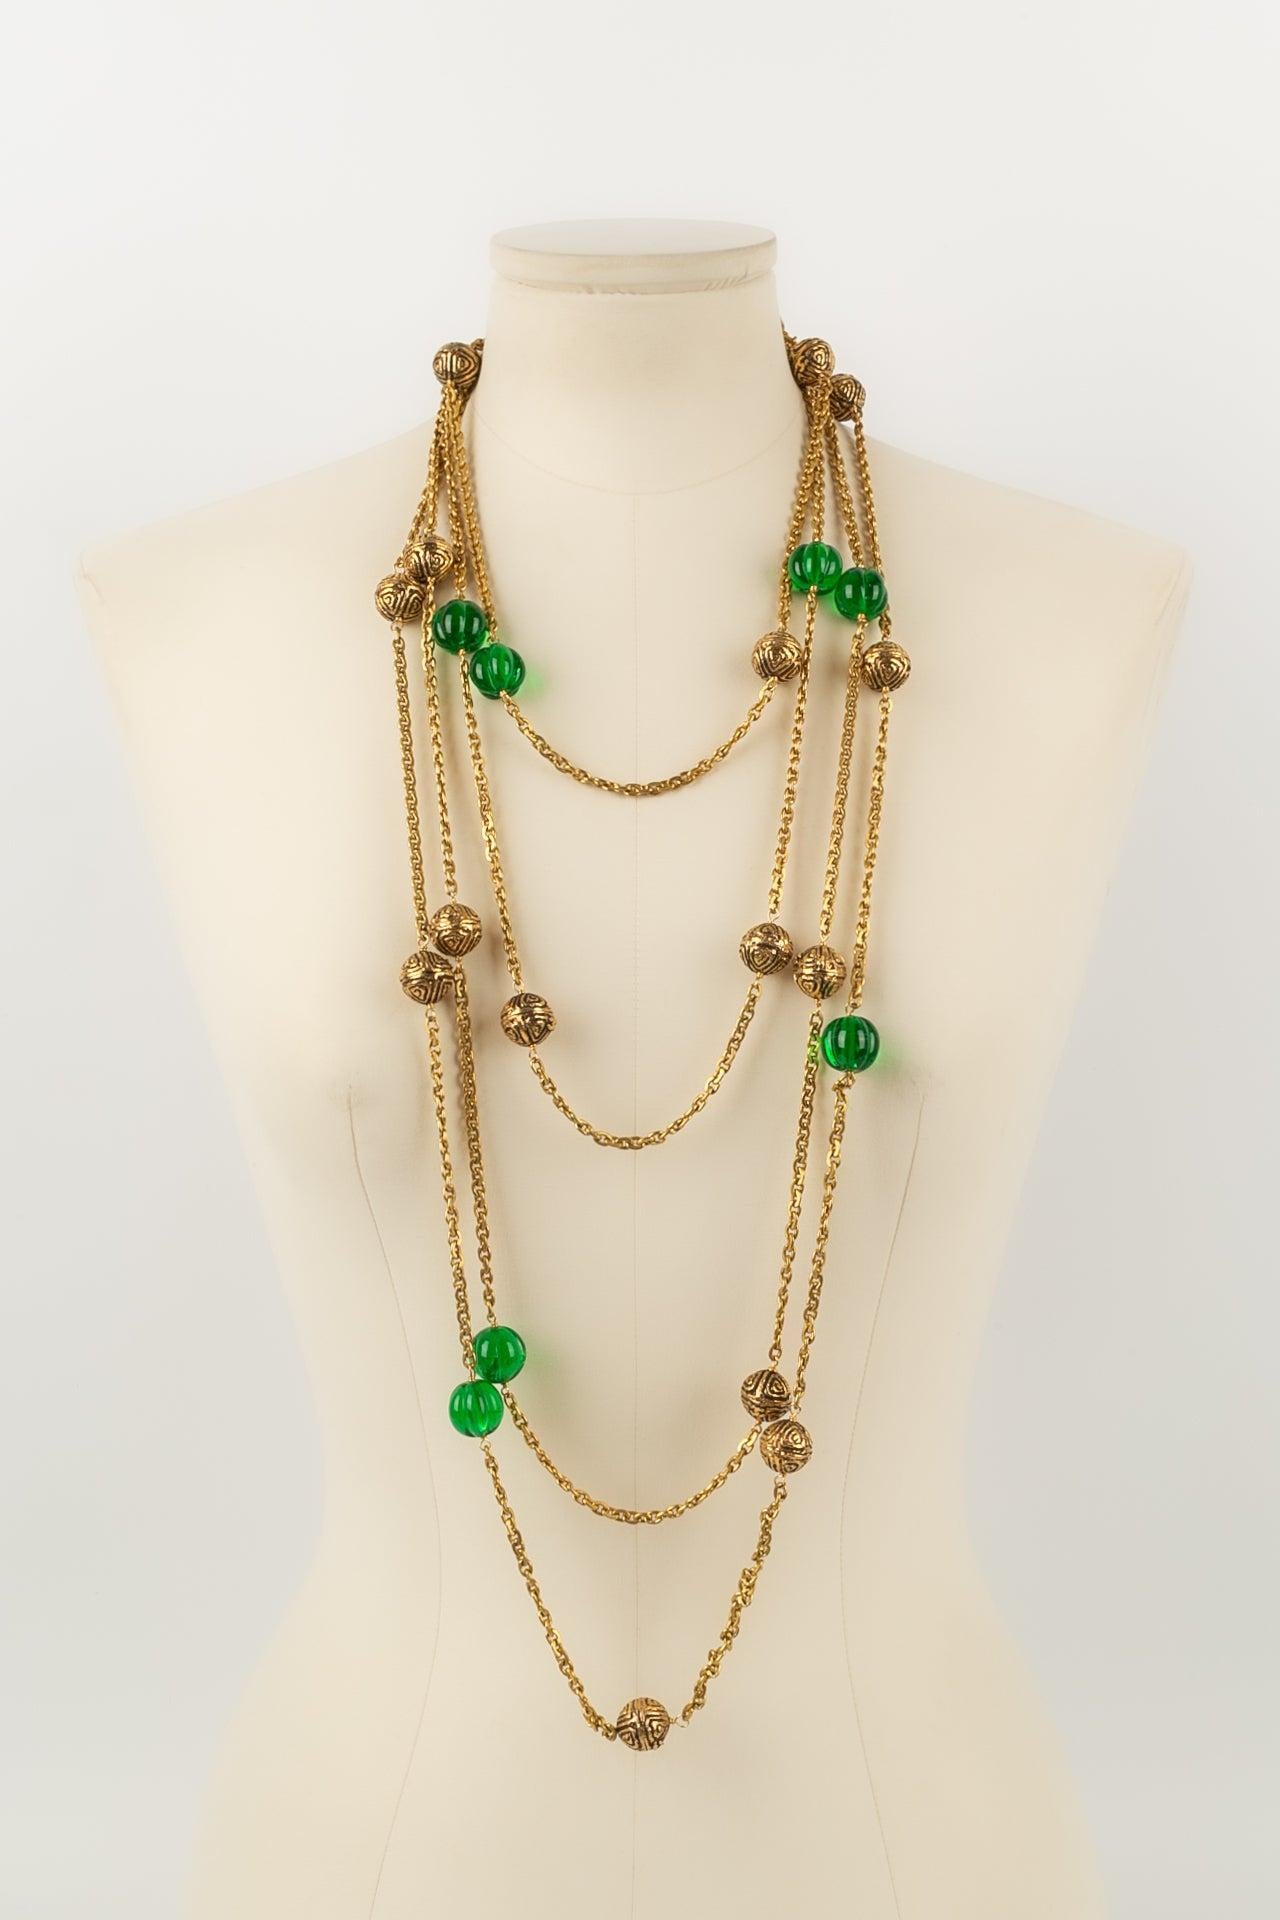 Chanel - (Made in France) Long necklace in gold metal and glass beads.

Additional information:
Dimensions: Length: 400 cm
Condition: Very good condition
Seller Ref number: CB137 